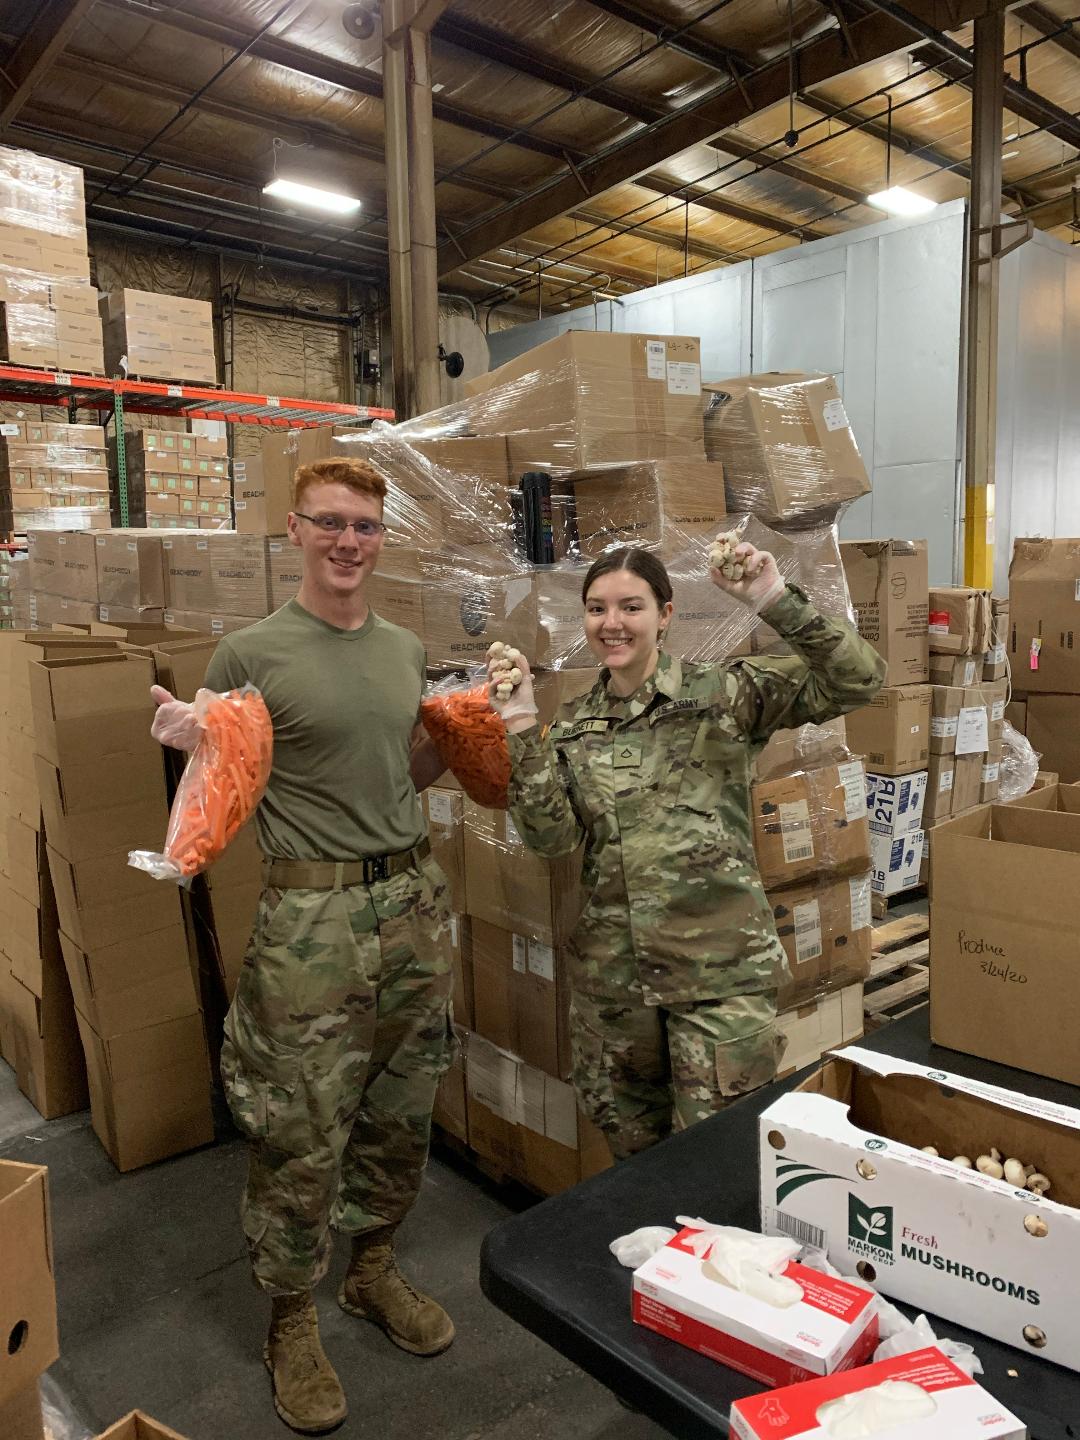 Soldiers load boxes with produce.